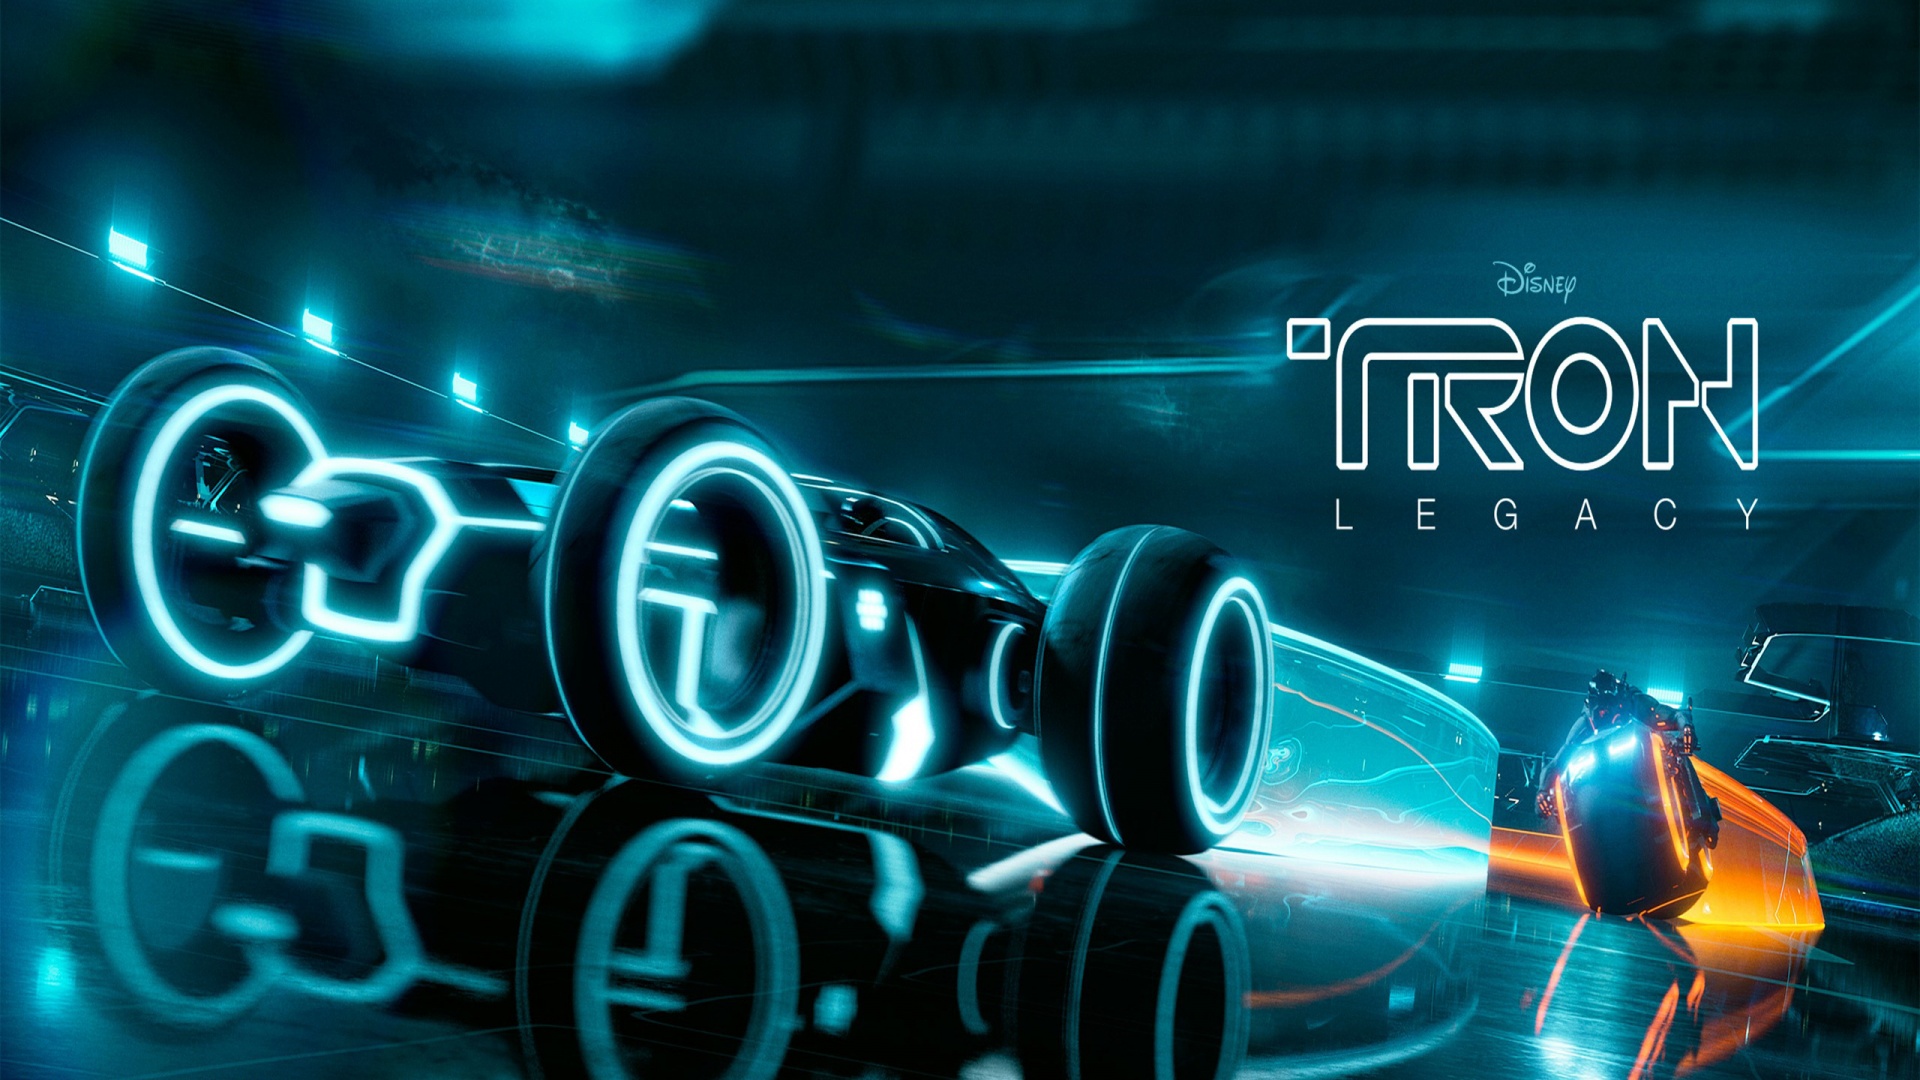 tron legacy wallpaper,font,text,graphic design,advertising,neon